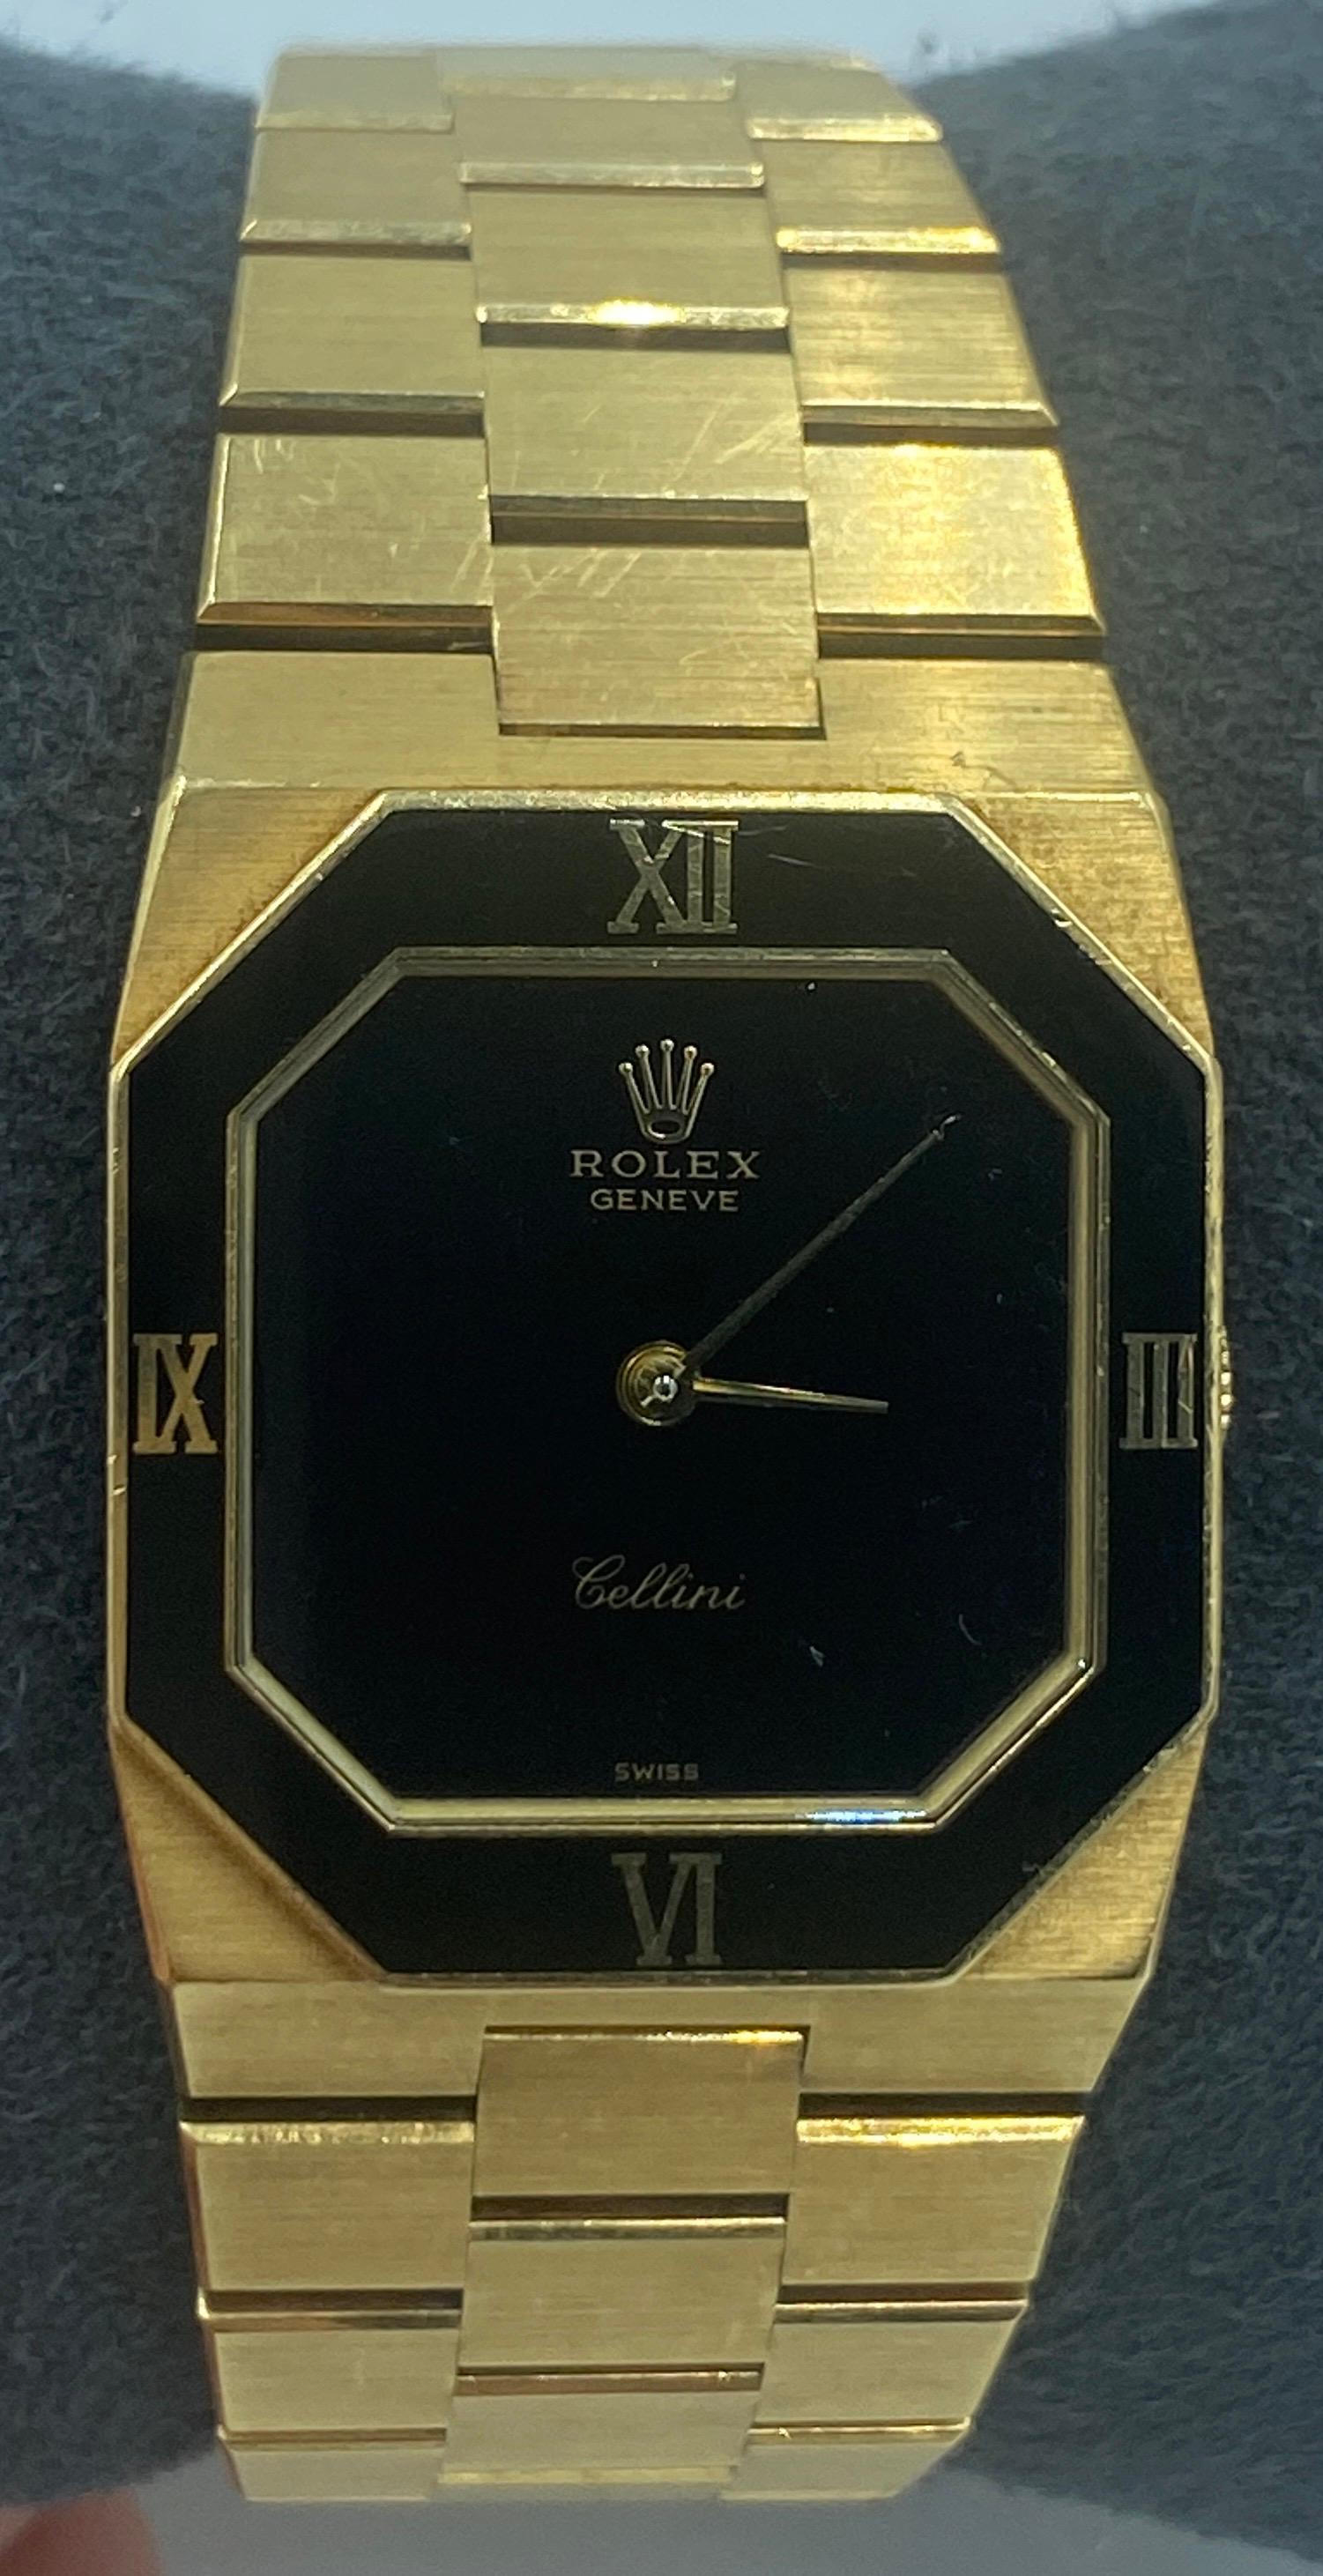 This is an extremely rare and highly collectible Rolex Cellini watch from circa 1980. This reference 4354 is incredibly rare. It is a variation of the more common reference 4350, presumably to reflect the special variant on this watch of the black,